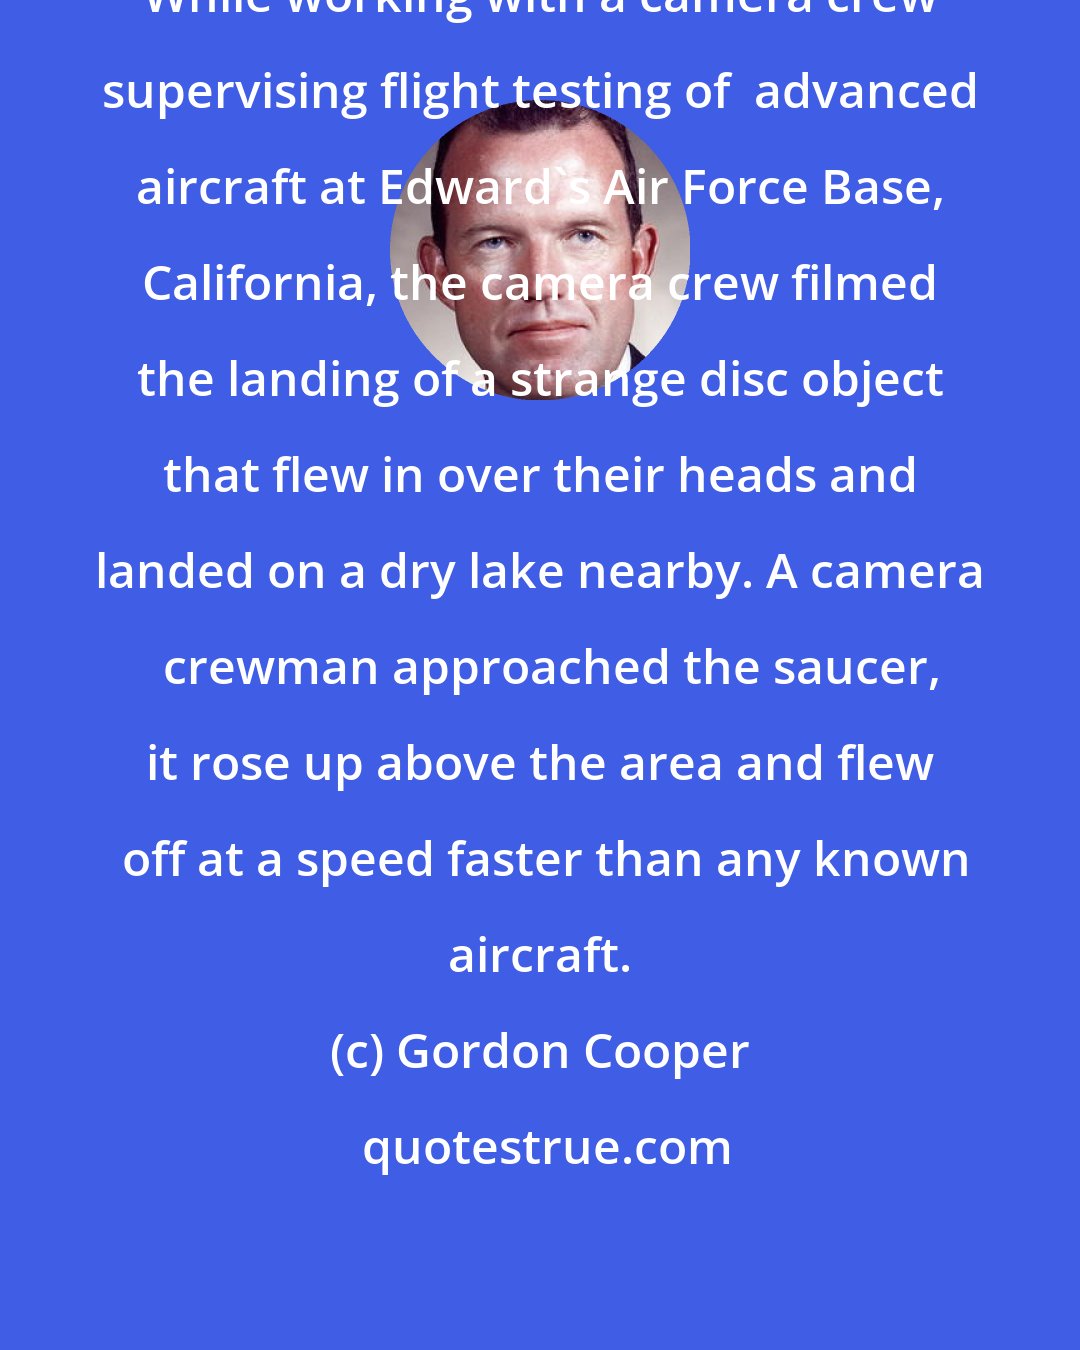 Gordon Cooper: While working with a camera crew supervising flight testing of  advanced aircraft at Edward's Air Force Base, California, the camera crew filmed the landing of a strange disc object that flew in over their heads and landed on a dry lake nearby. A camera   crewman approached the saucer, it rose up above the area and flew  off at a speed faster than any known aircraft.